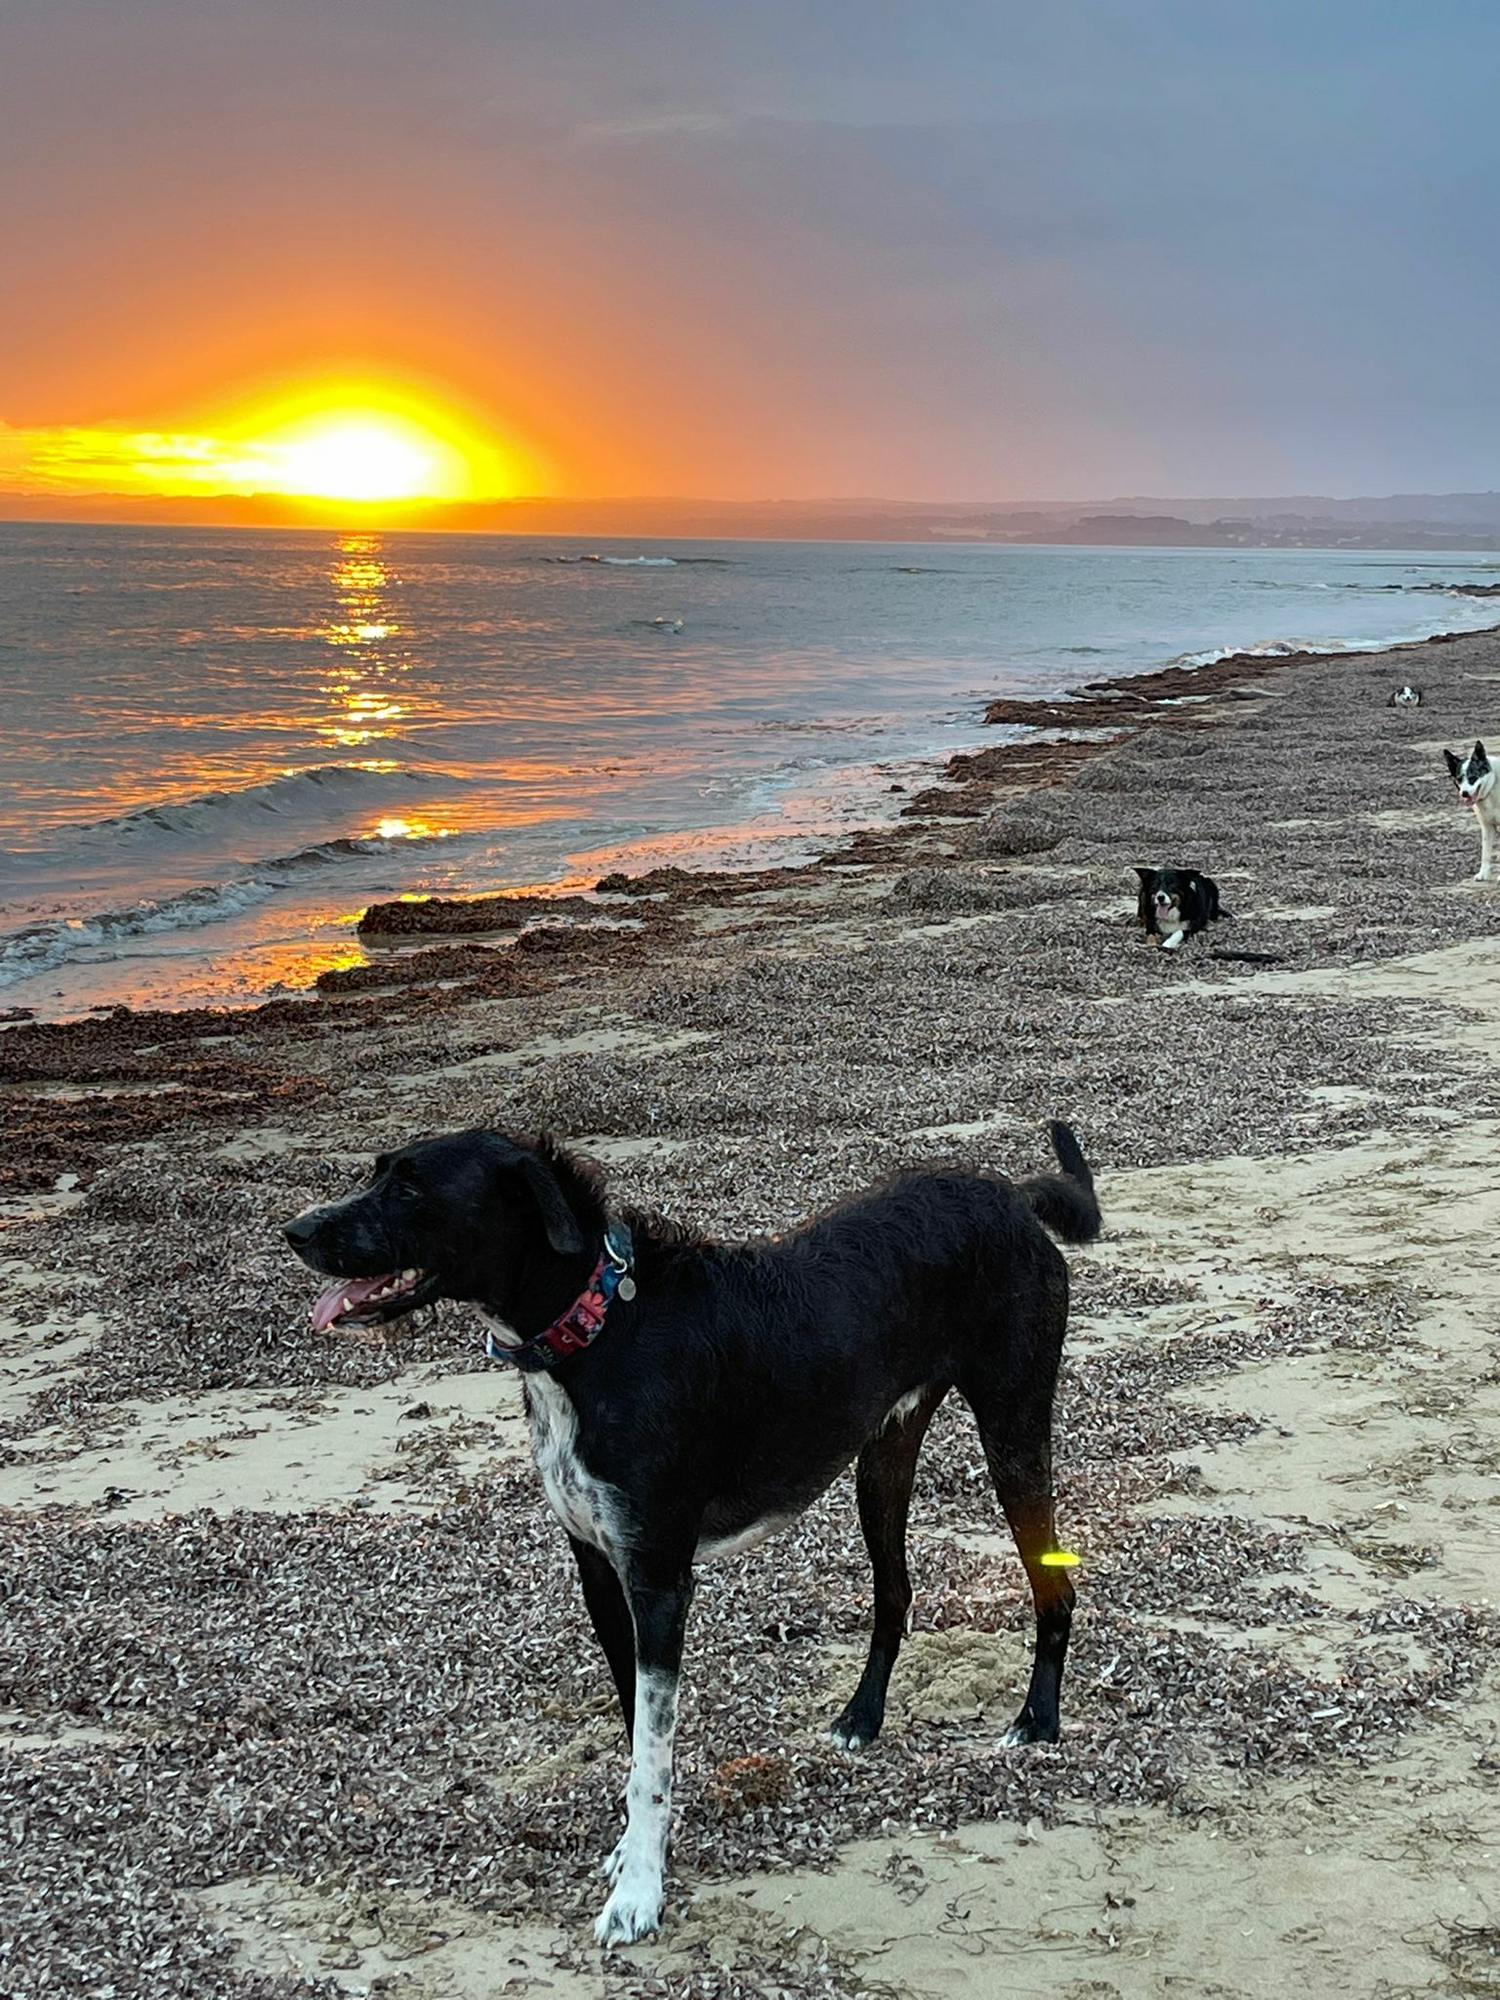 A big black shaggy dog on a beach with a sunset in the background